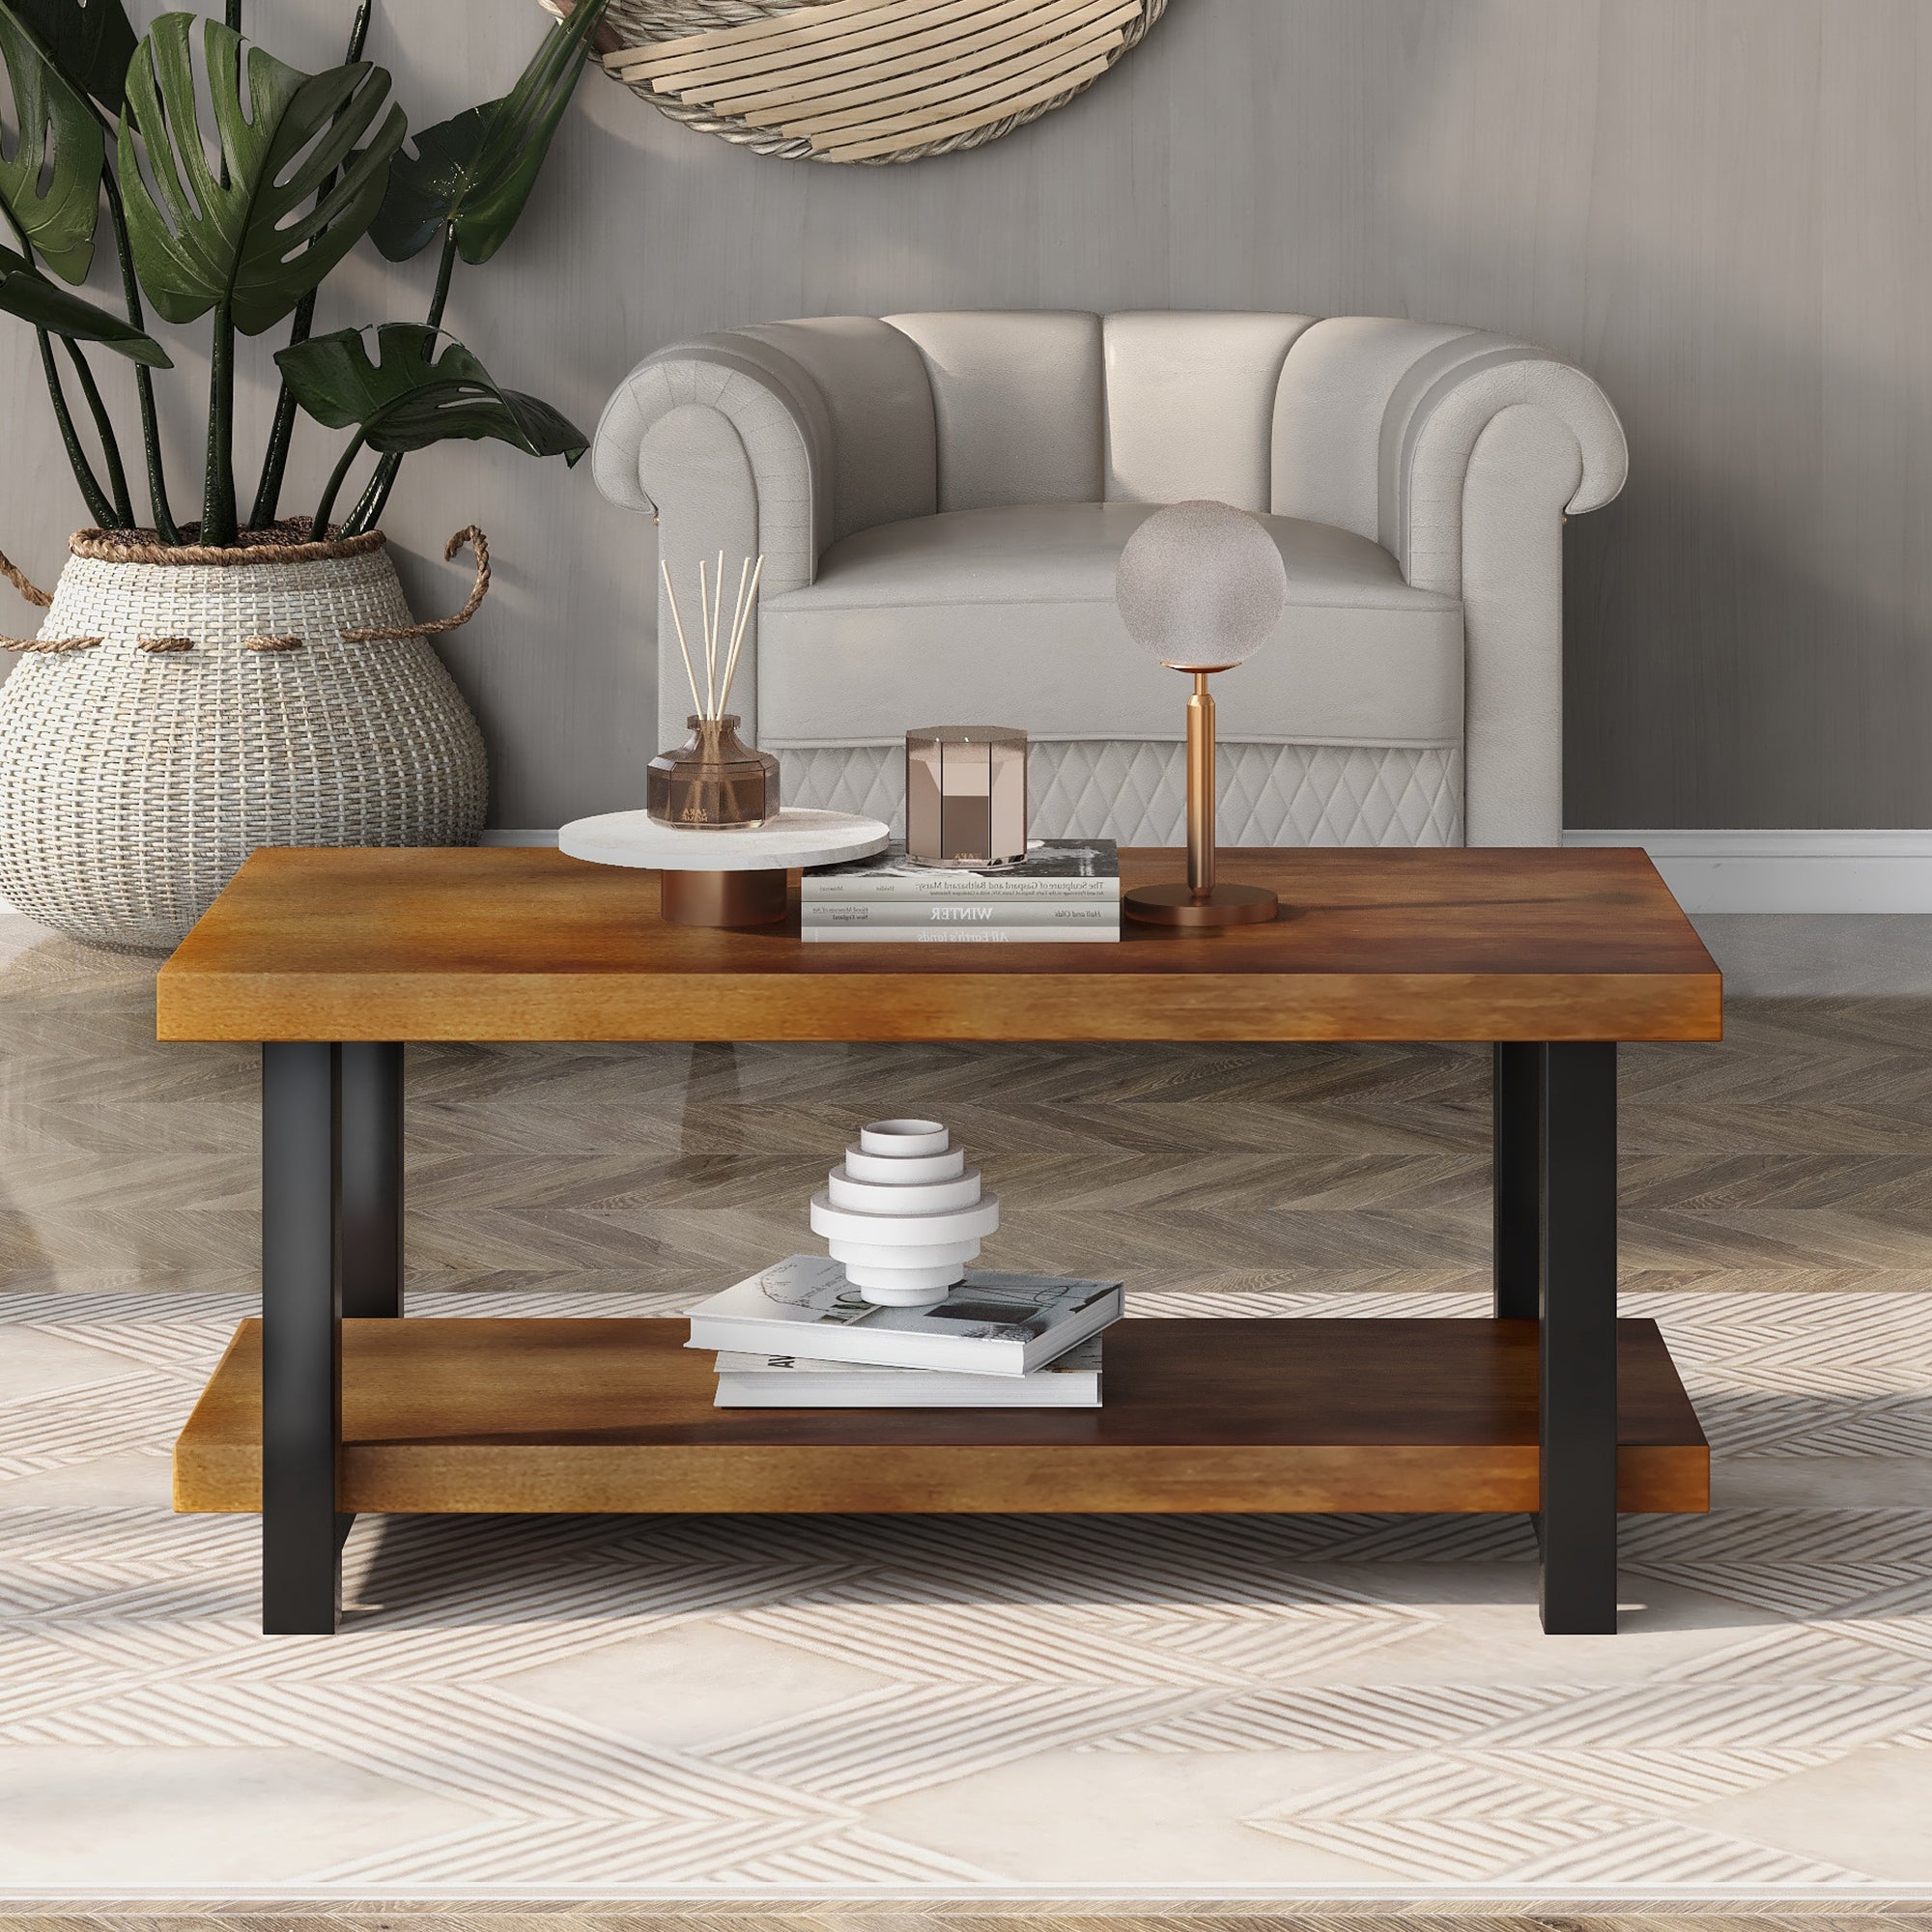 TREXM Rustic Natural Coffee Table with Storage Shelf for Living Room, Easy Assembly (Rectangle)